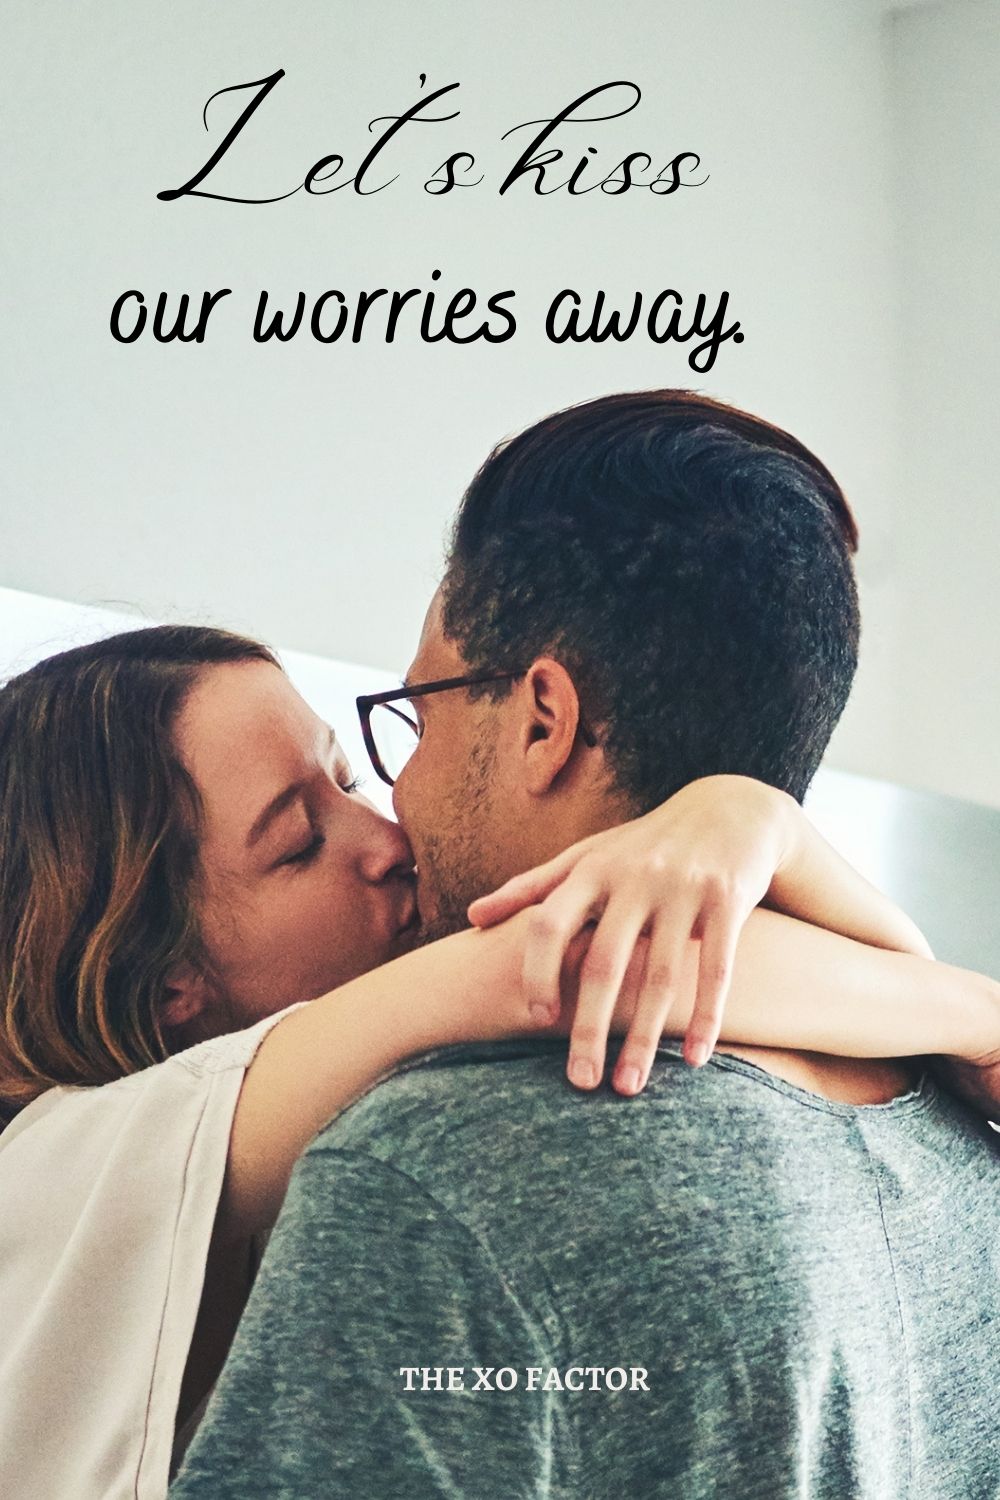 Let’s kiss our worries away.